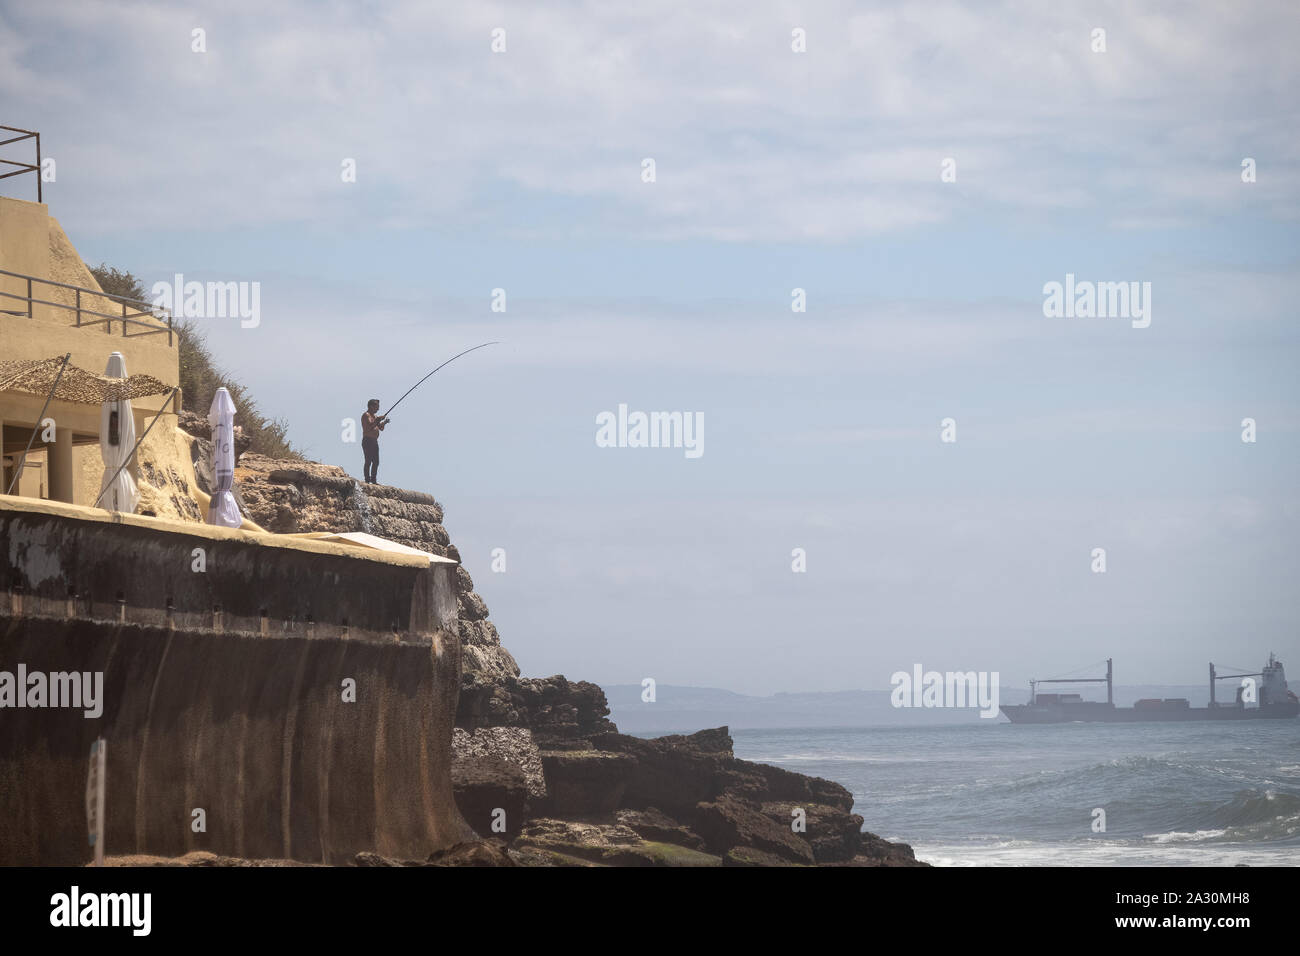 Coast of Portugal, Parede district. Ocean landscape, a man fishing, waves crashing against the rocks. Stock Photo